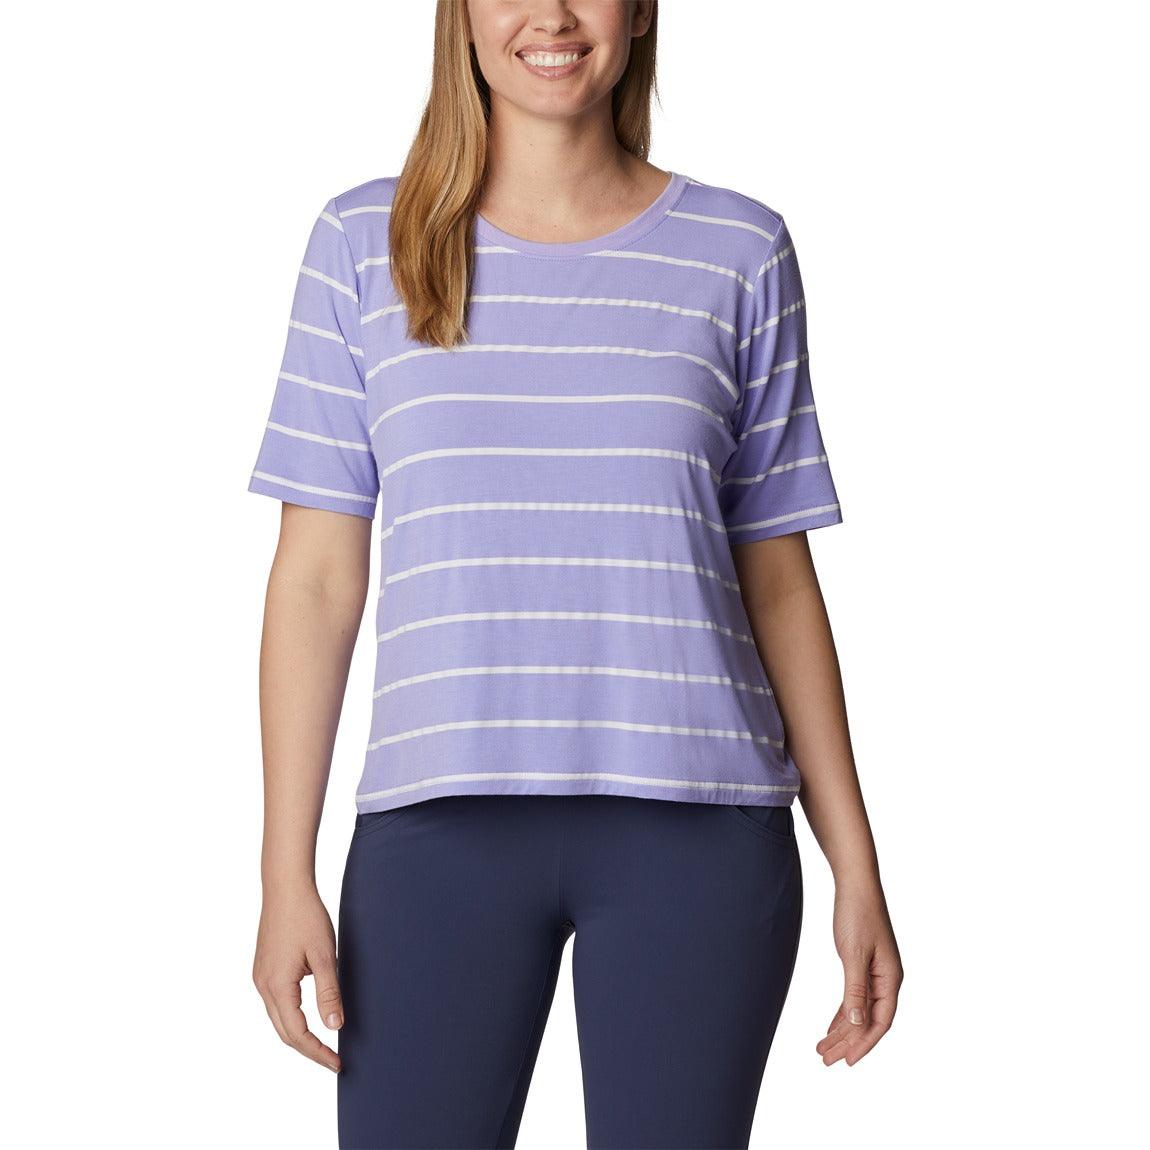 Anytime Knit Short Sleeve Tee - Women - Sports Excellence